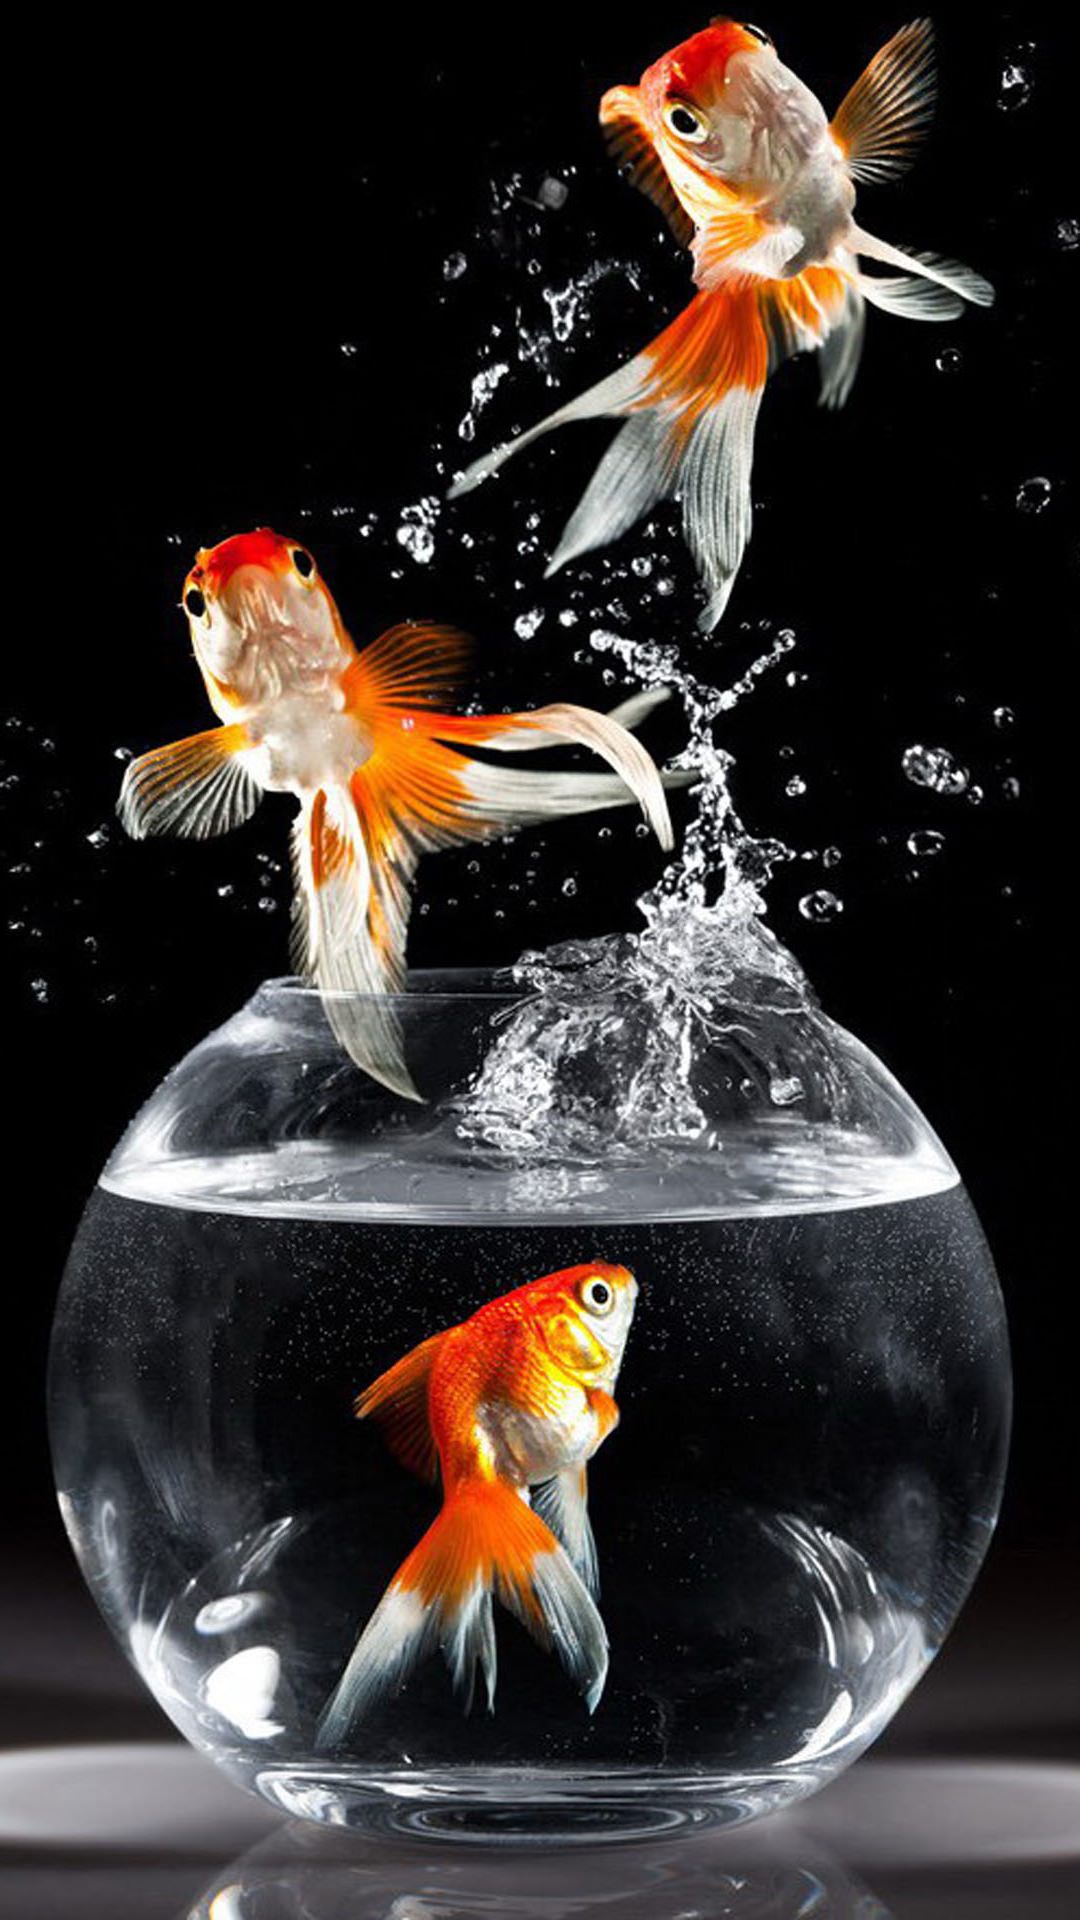 Android Smart Phone Wallpaper - Golden Fish In Bowl , HD Wallpaper & Backgrounds